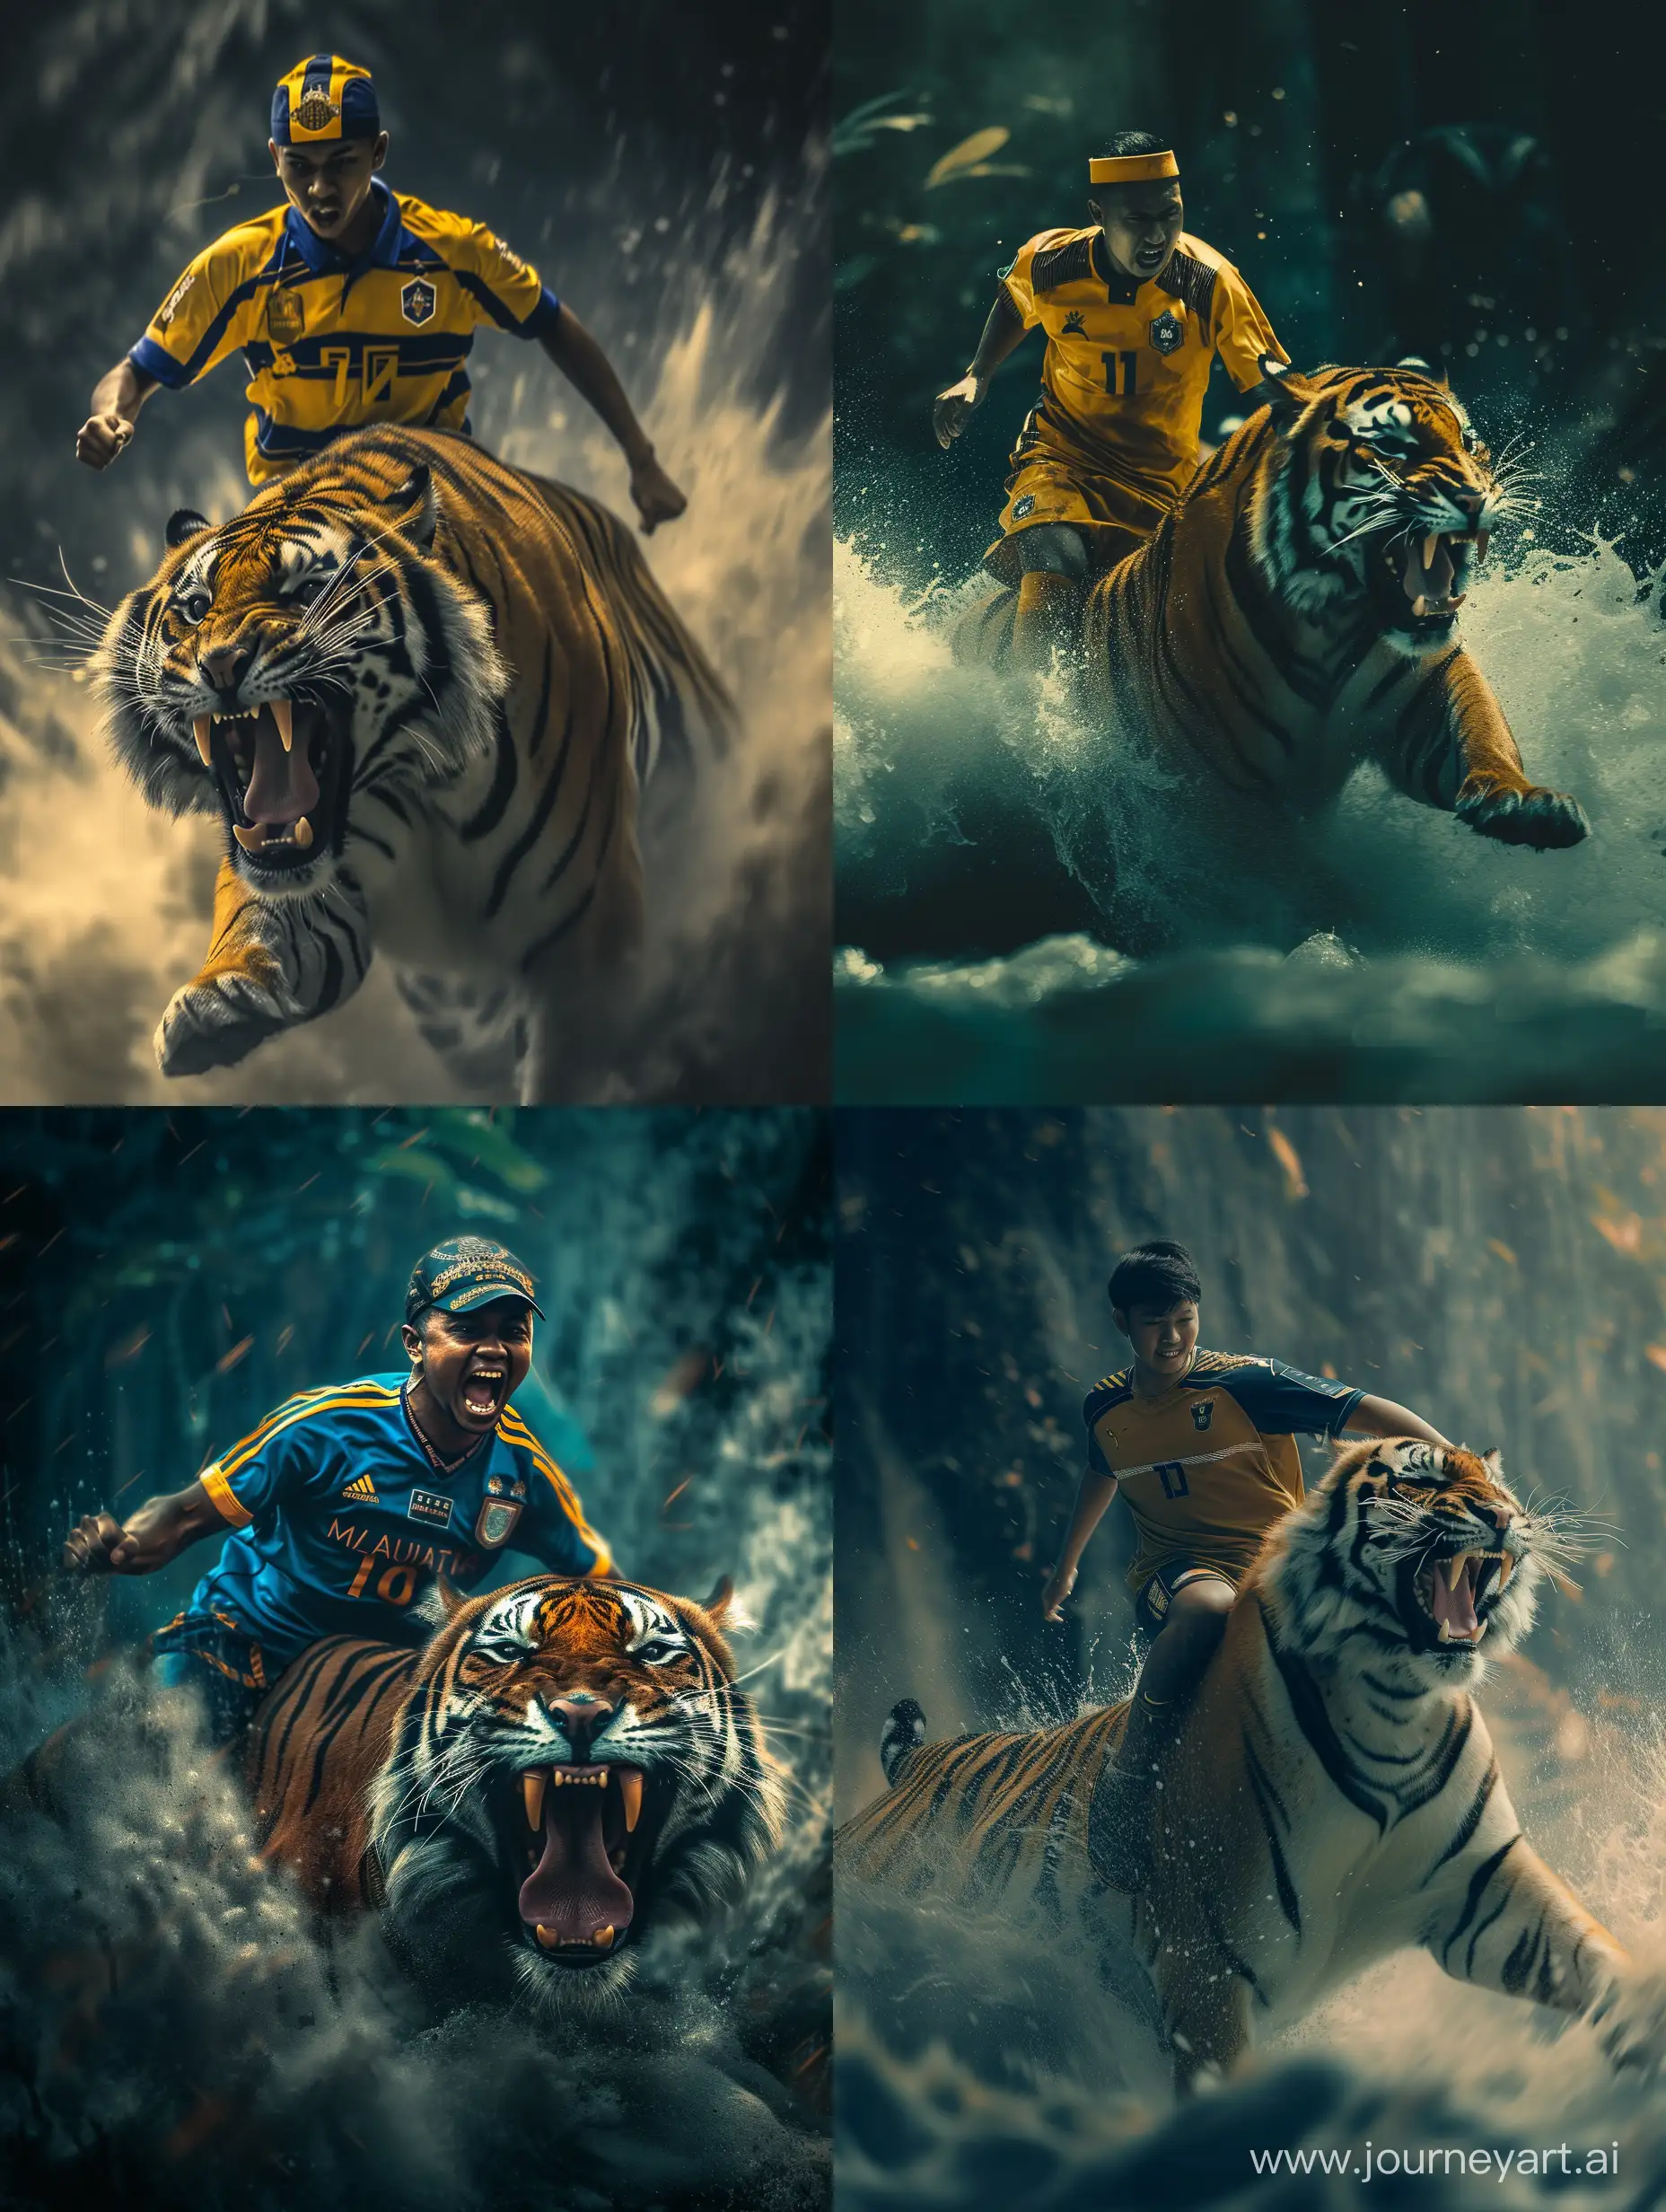 Realistic of Malay national team football player wear malaysia jersey is riding a fierce malayan tiger. canon eos-id x mark iii dslr --v 6.0